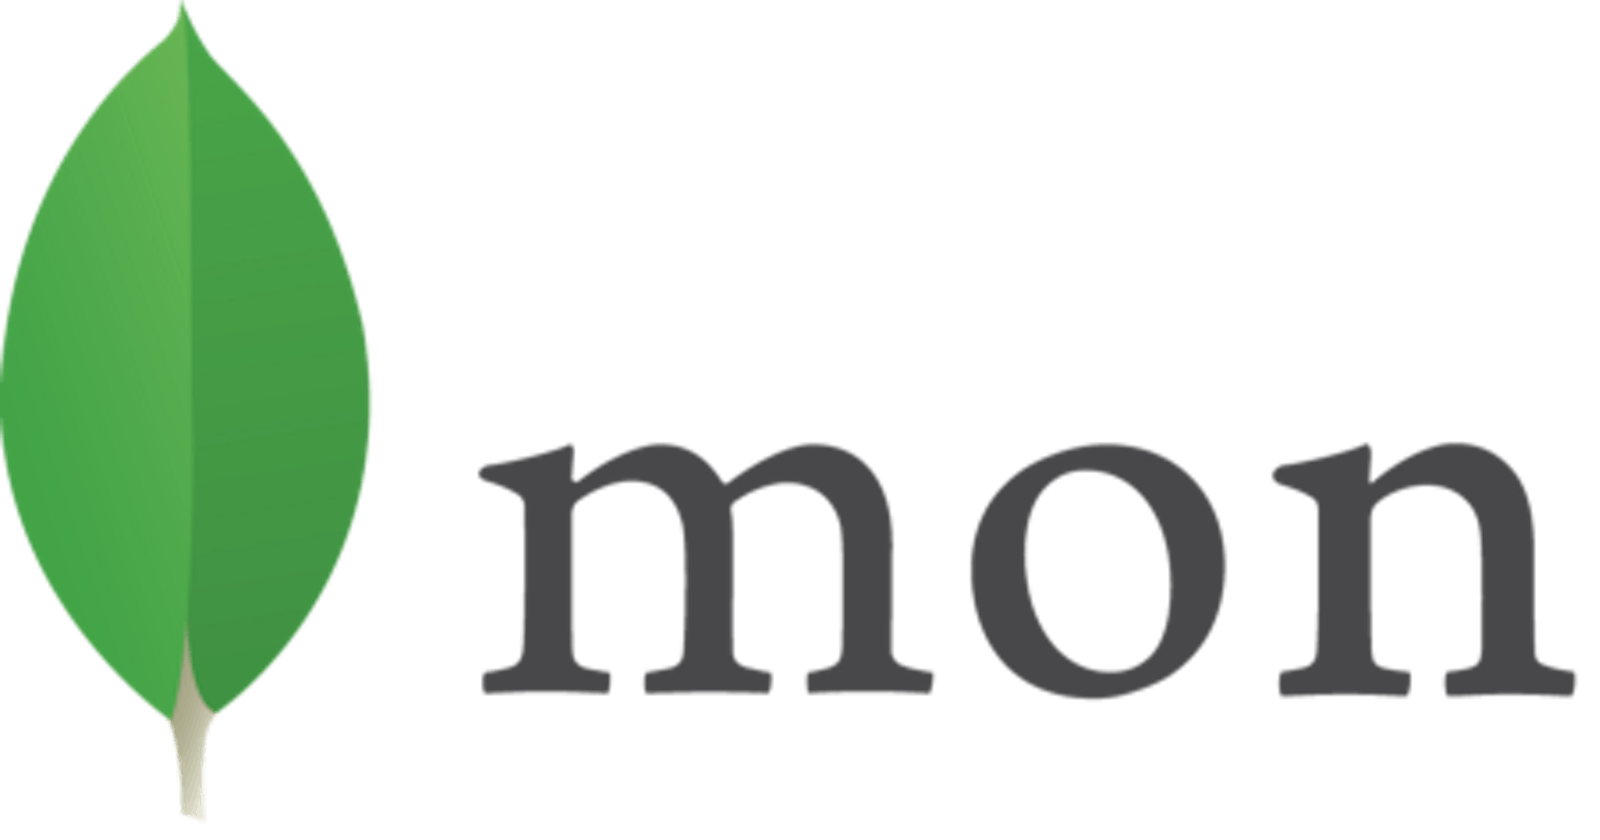 Getting Started With MongoDB